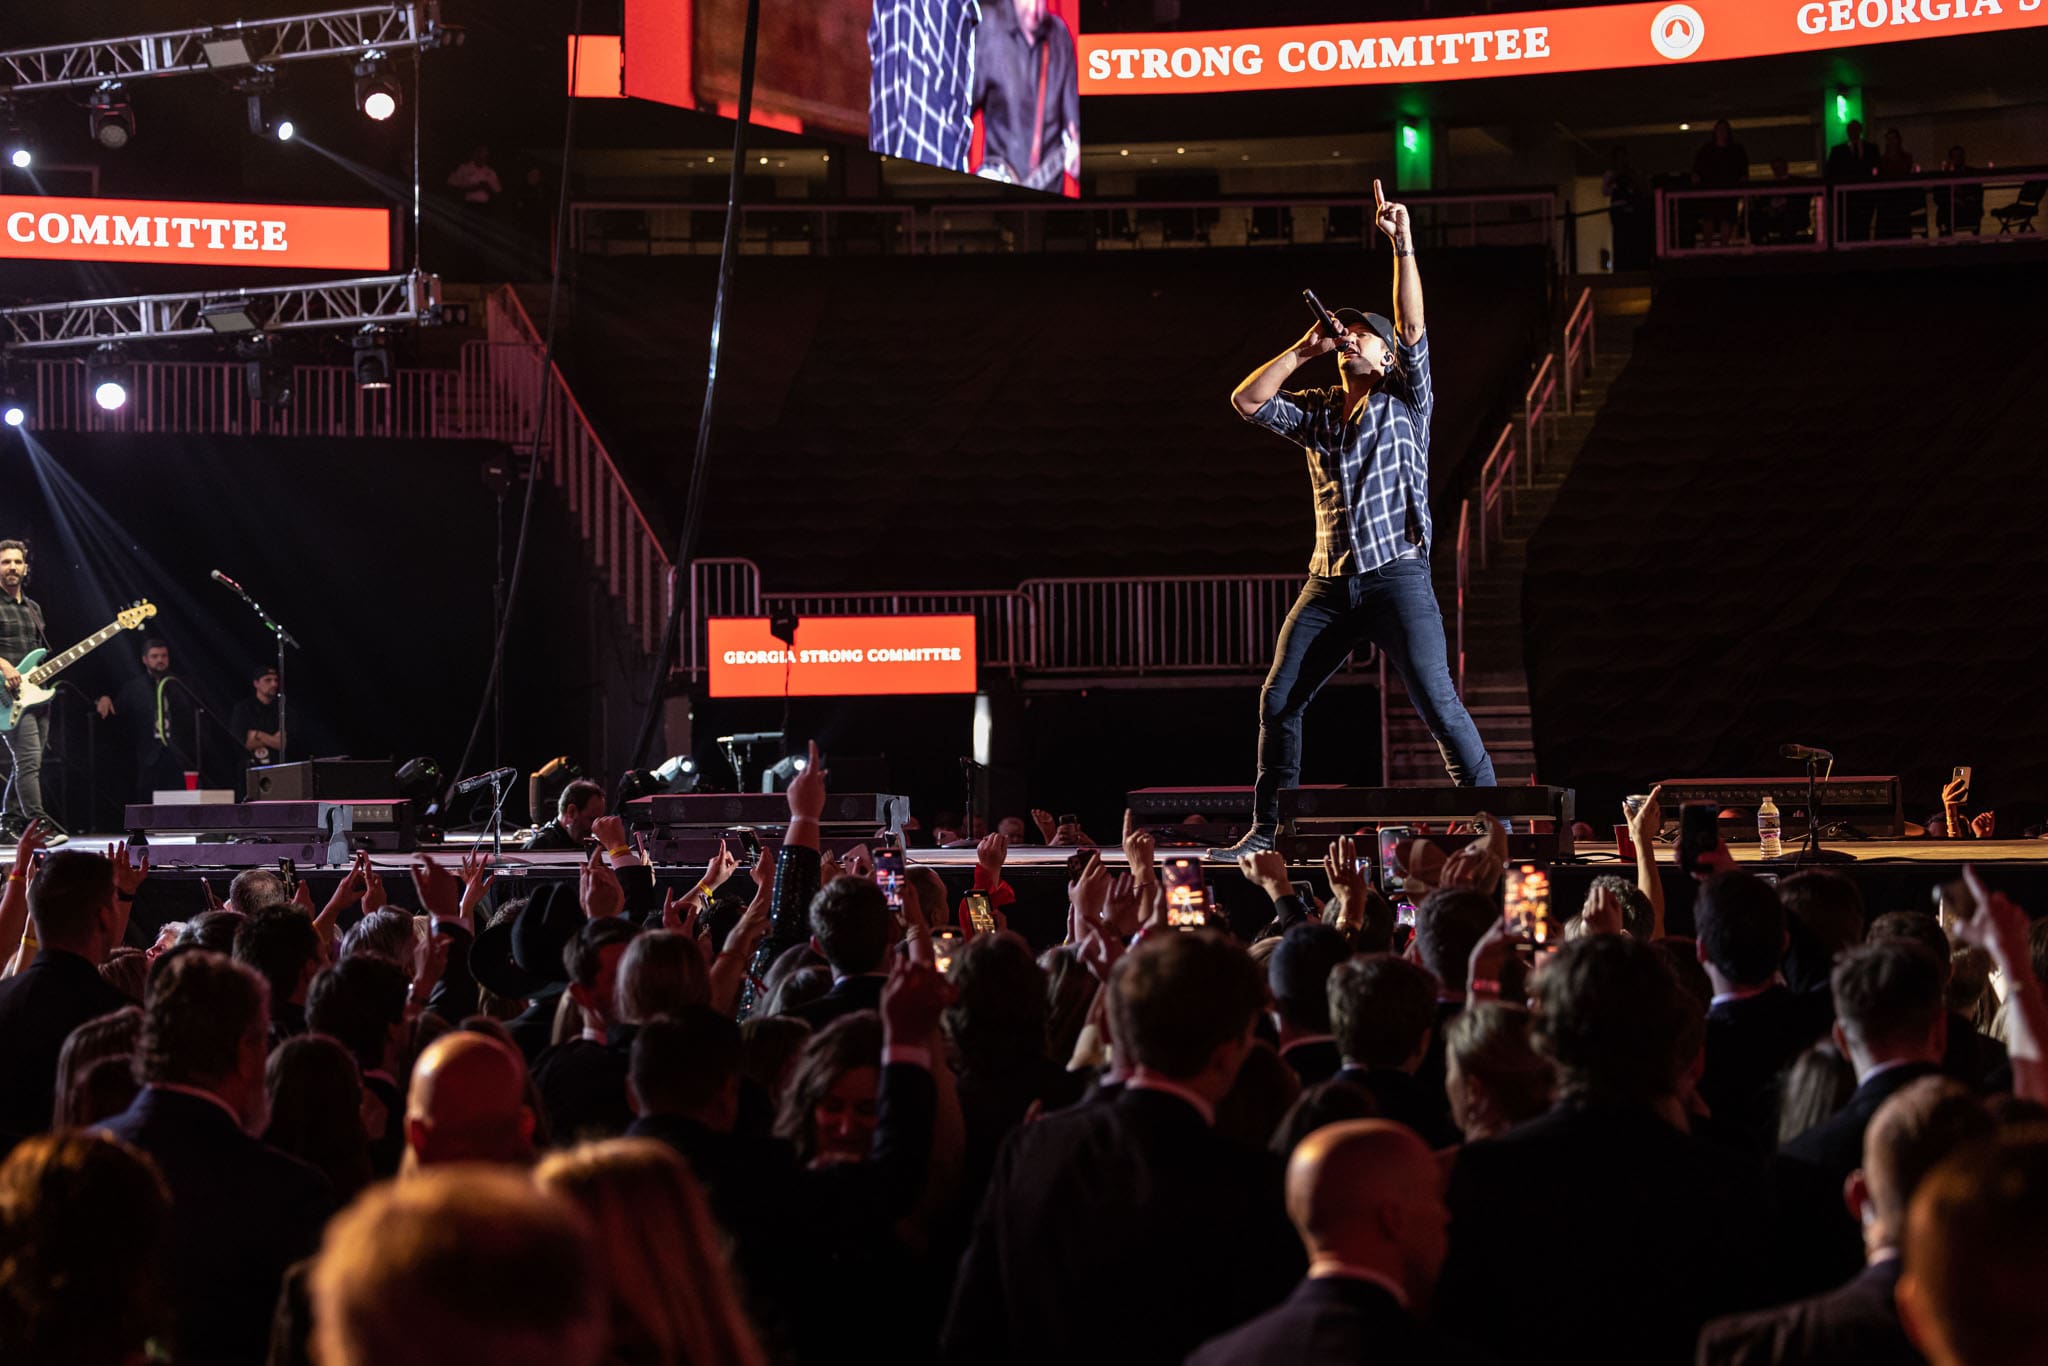 Luke-bryan-performing-at-governor-kemps-inauguration-gala-at-state-farm-arena-atlanta-with-crowd-in-foreground